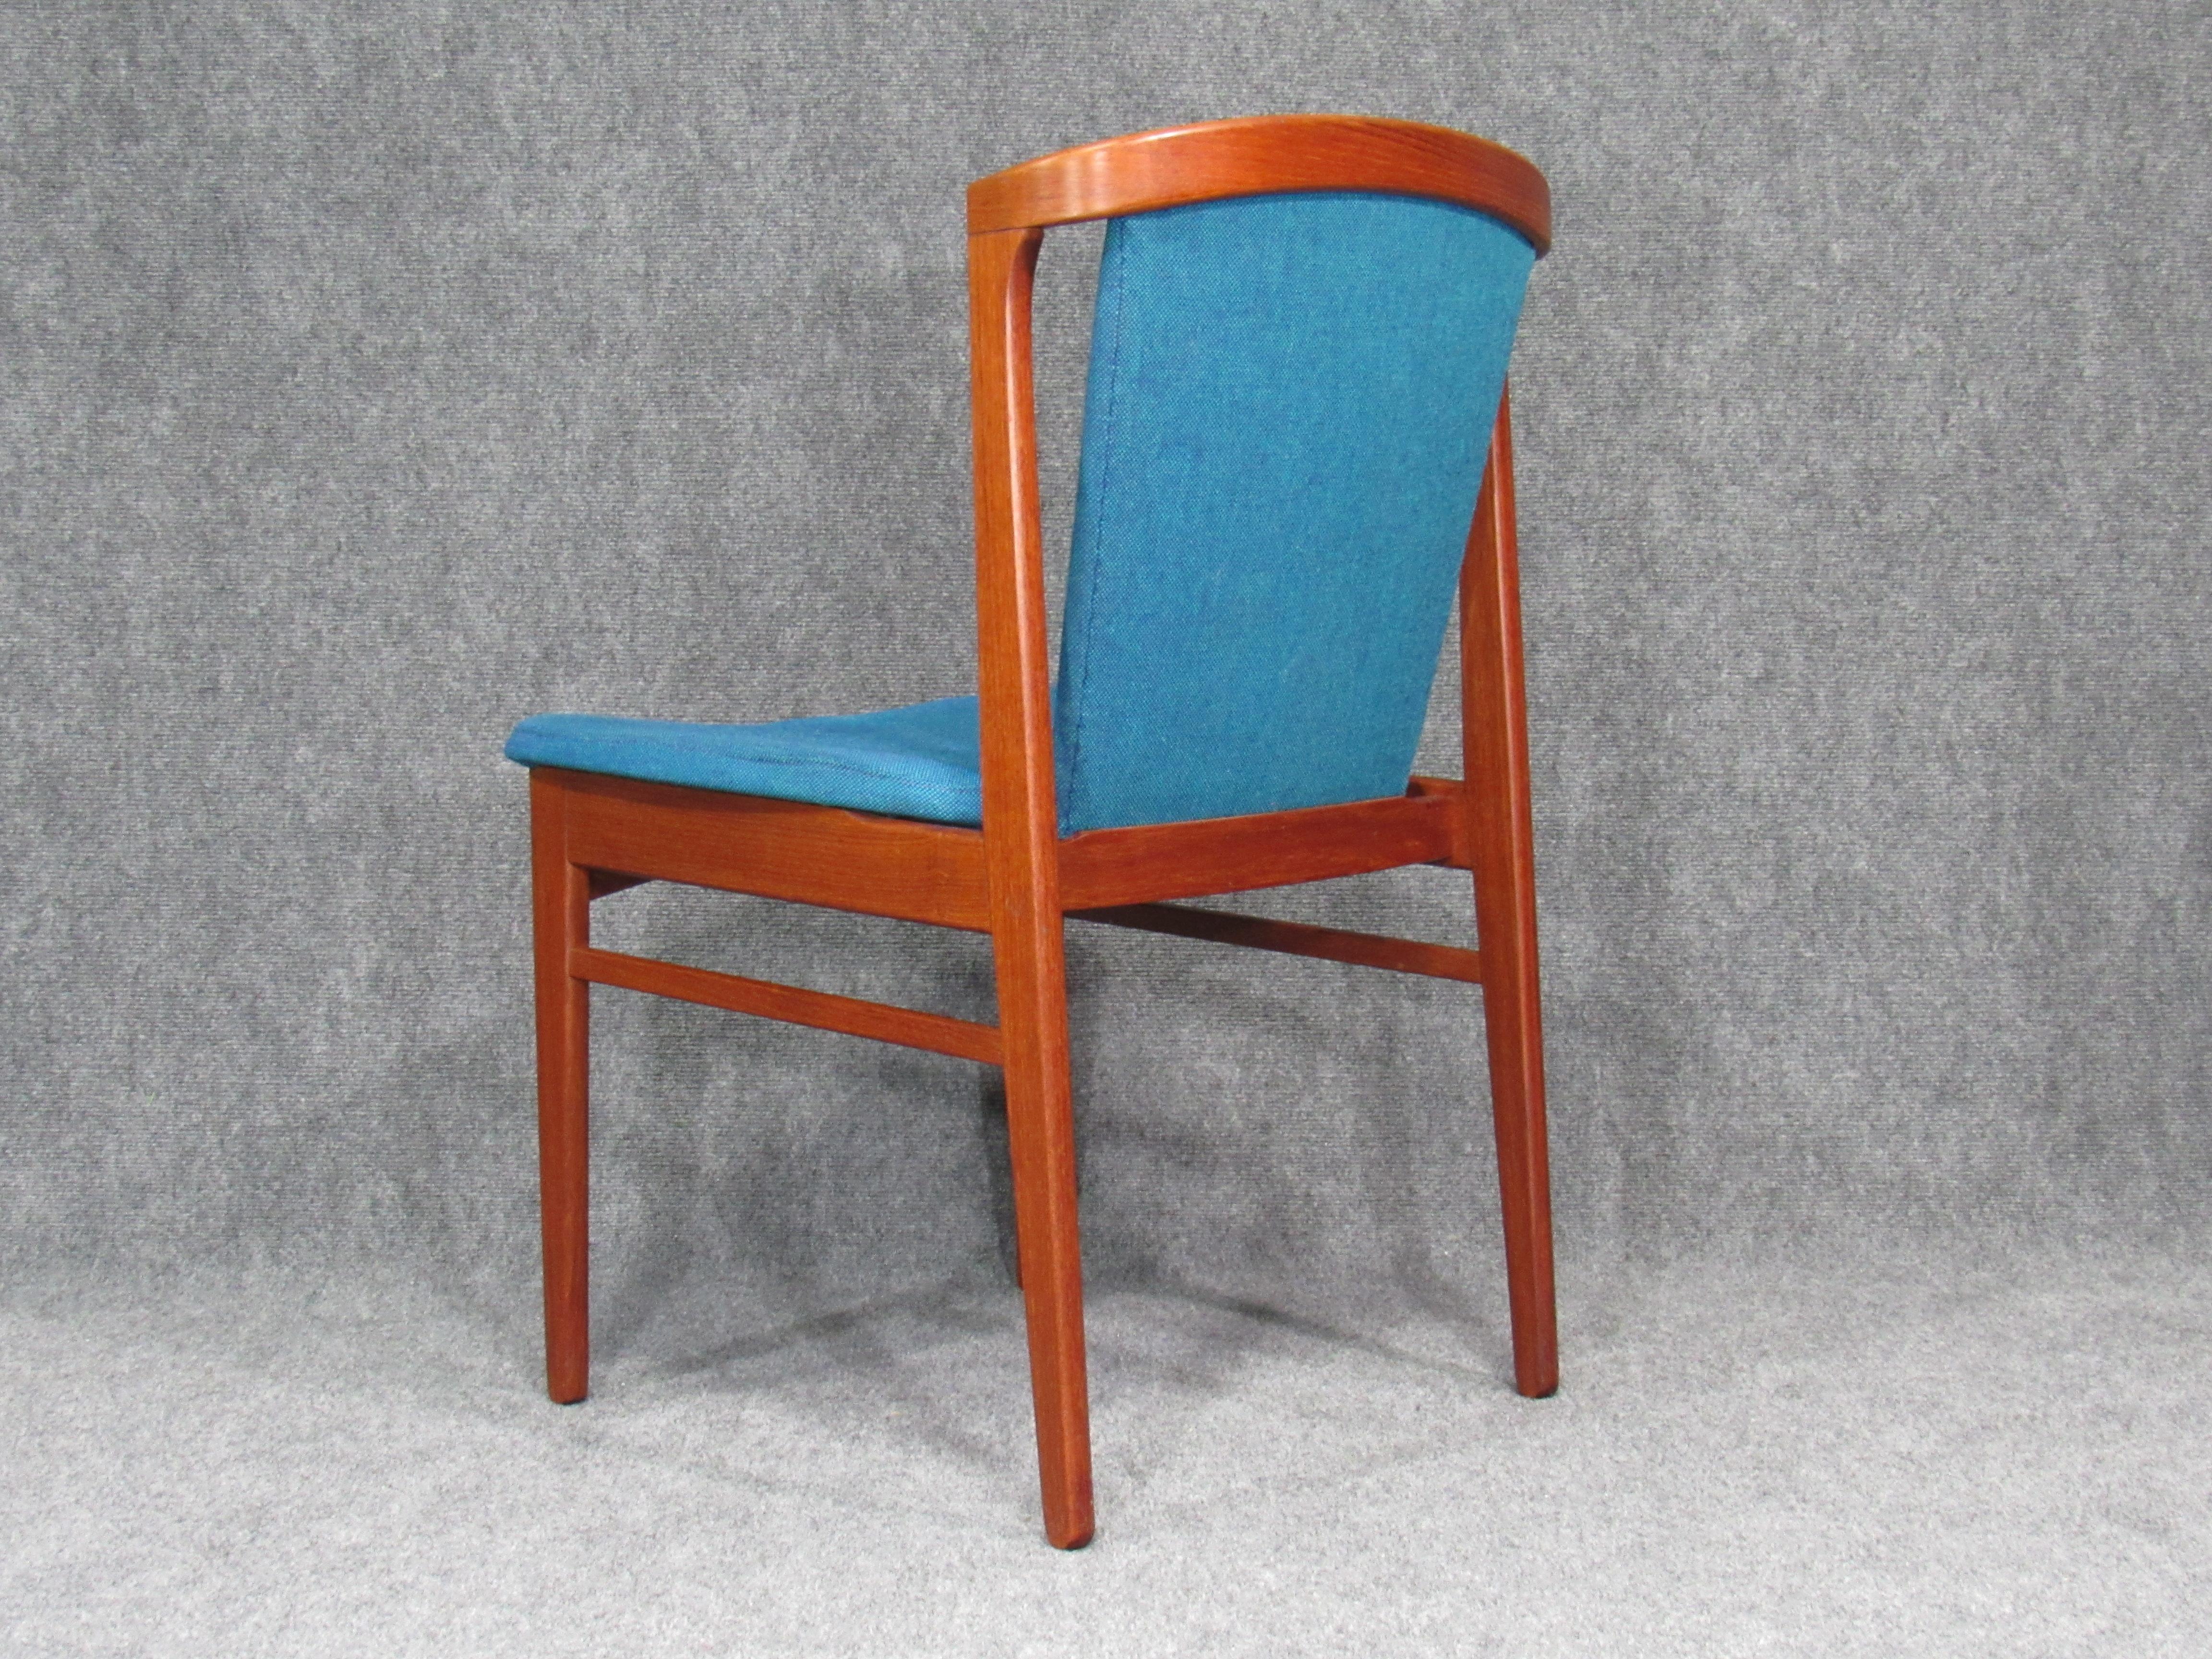 This set of six rare midcentury, Danish modern teak dining chairs by Erik Buck for Chr. Christiansen will be the focal point of any dining or eating area. These chairs are an extraordinary example of Erik Buch's design prowess as well as Chr.